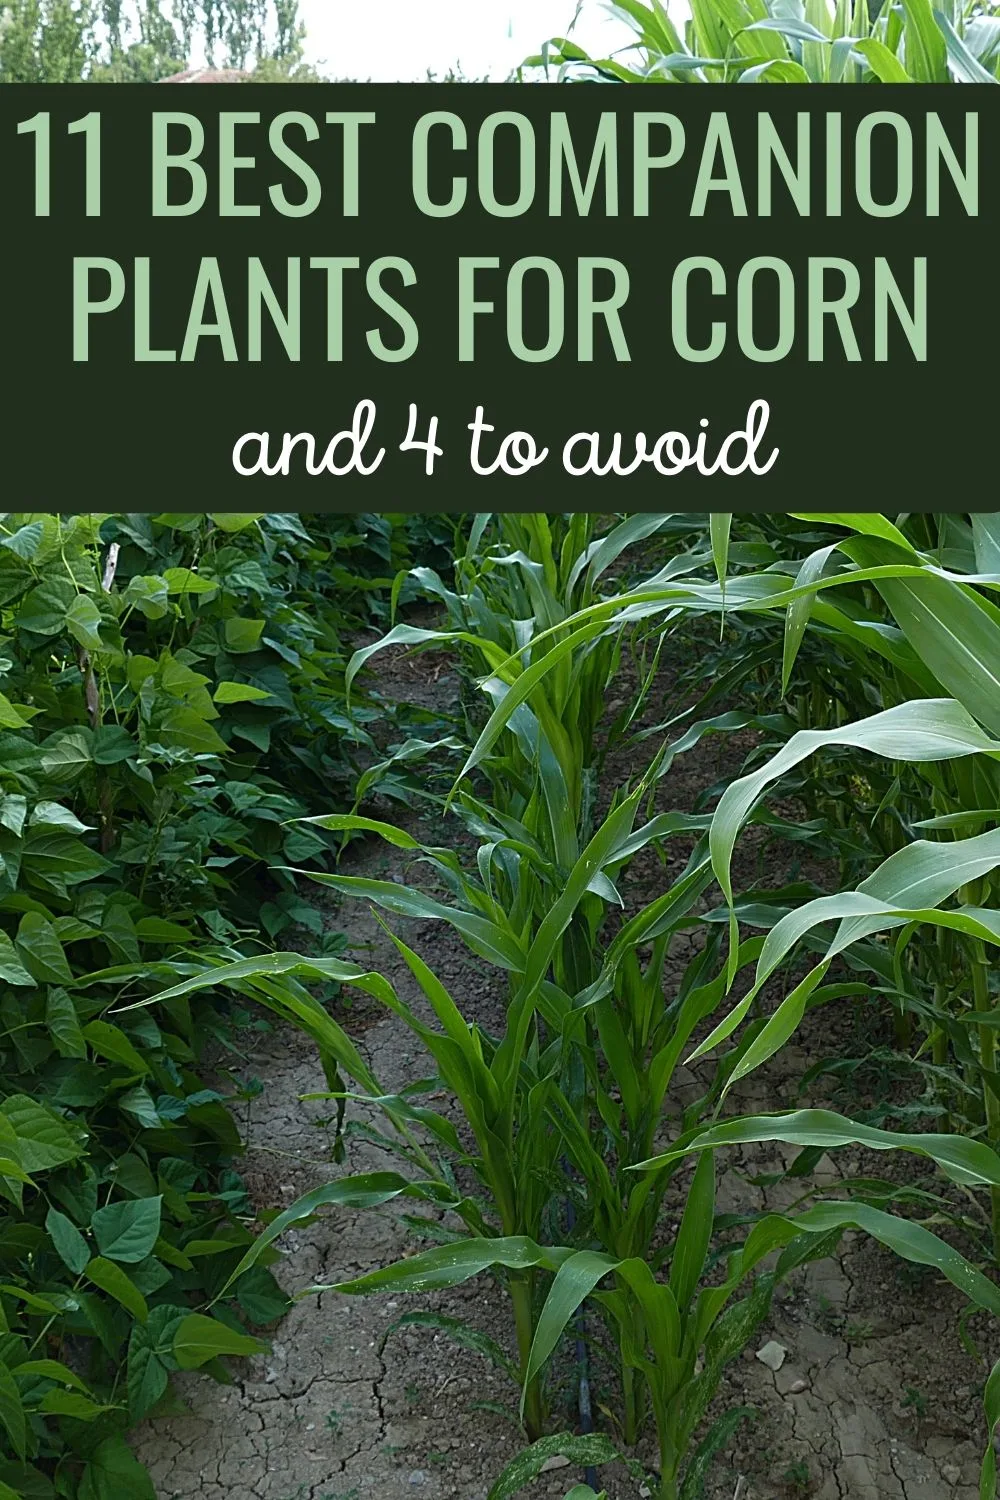 11 Best Companion Plants for Corn - And 4 to Avoid